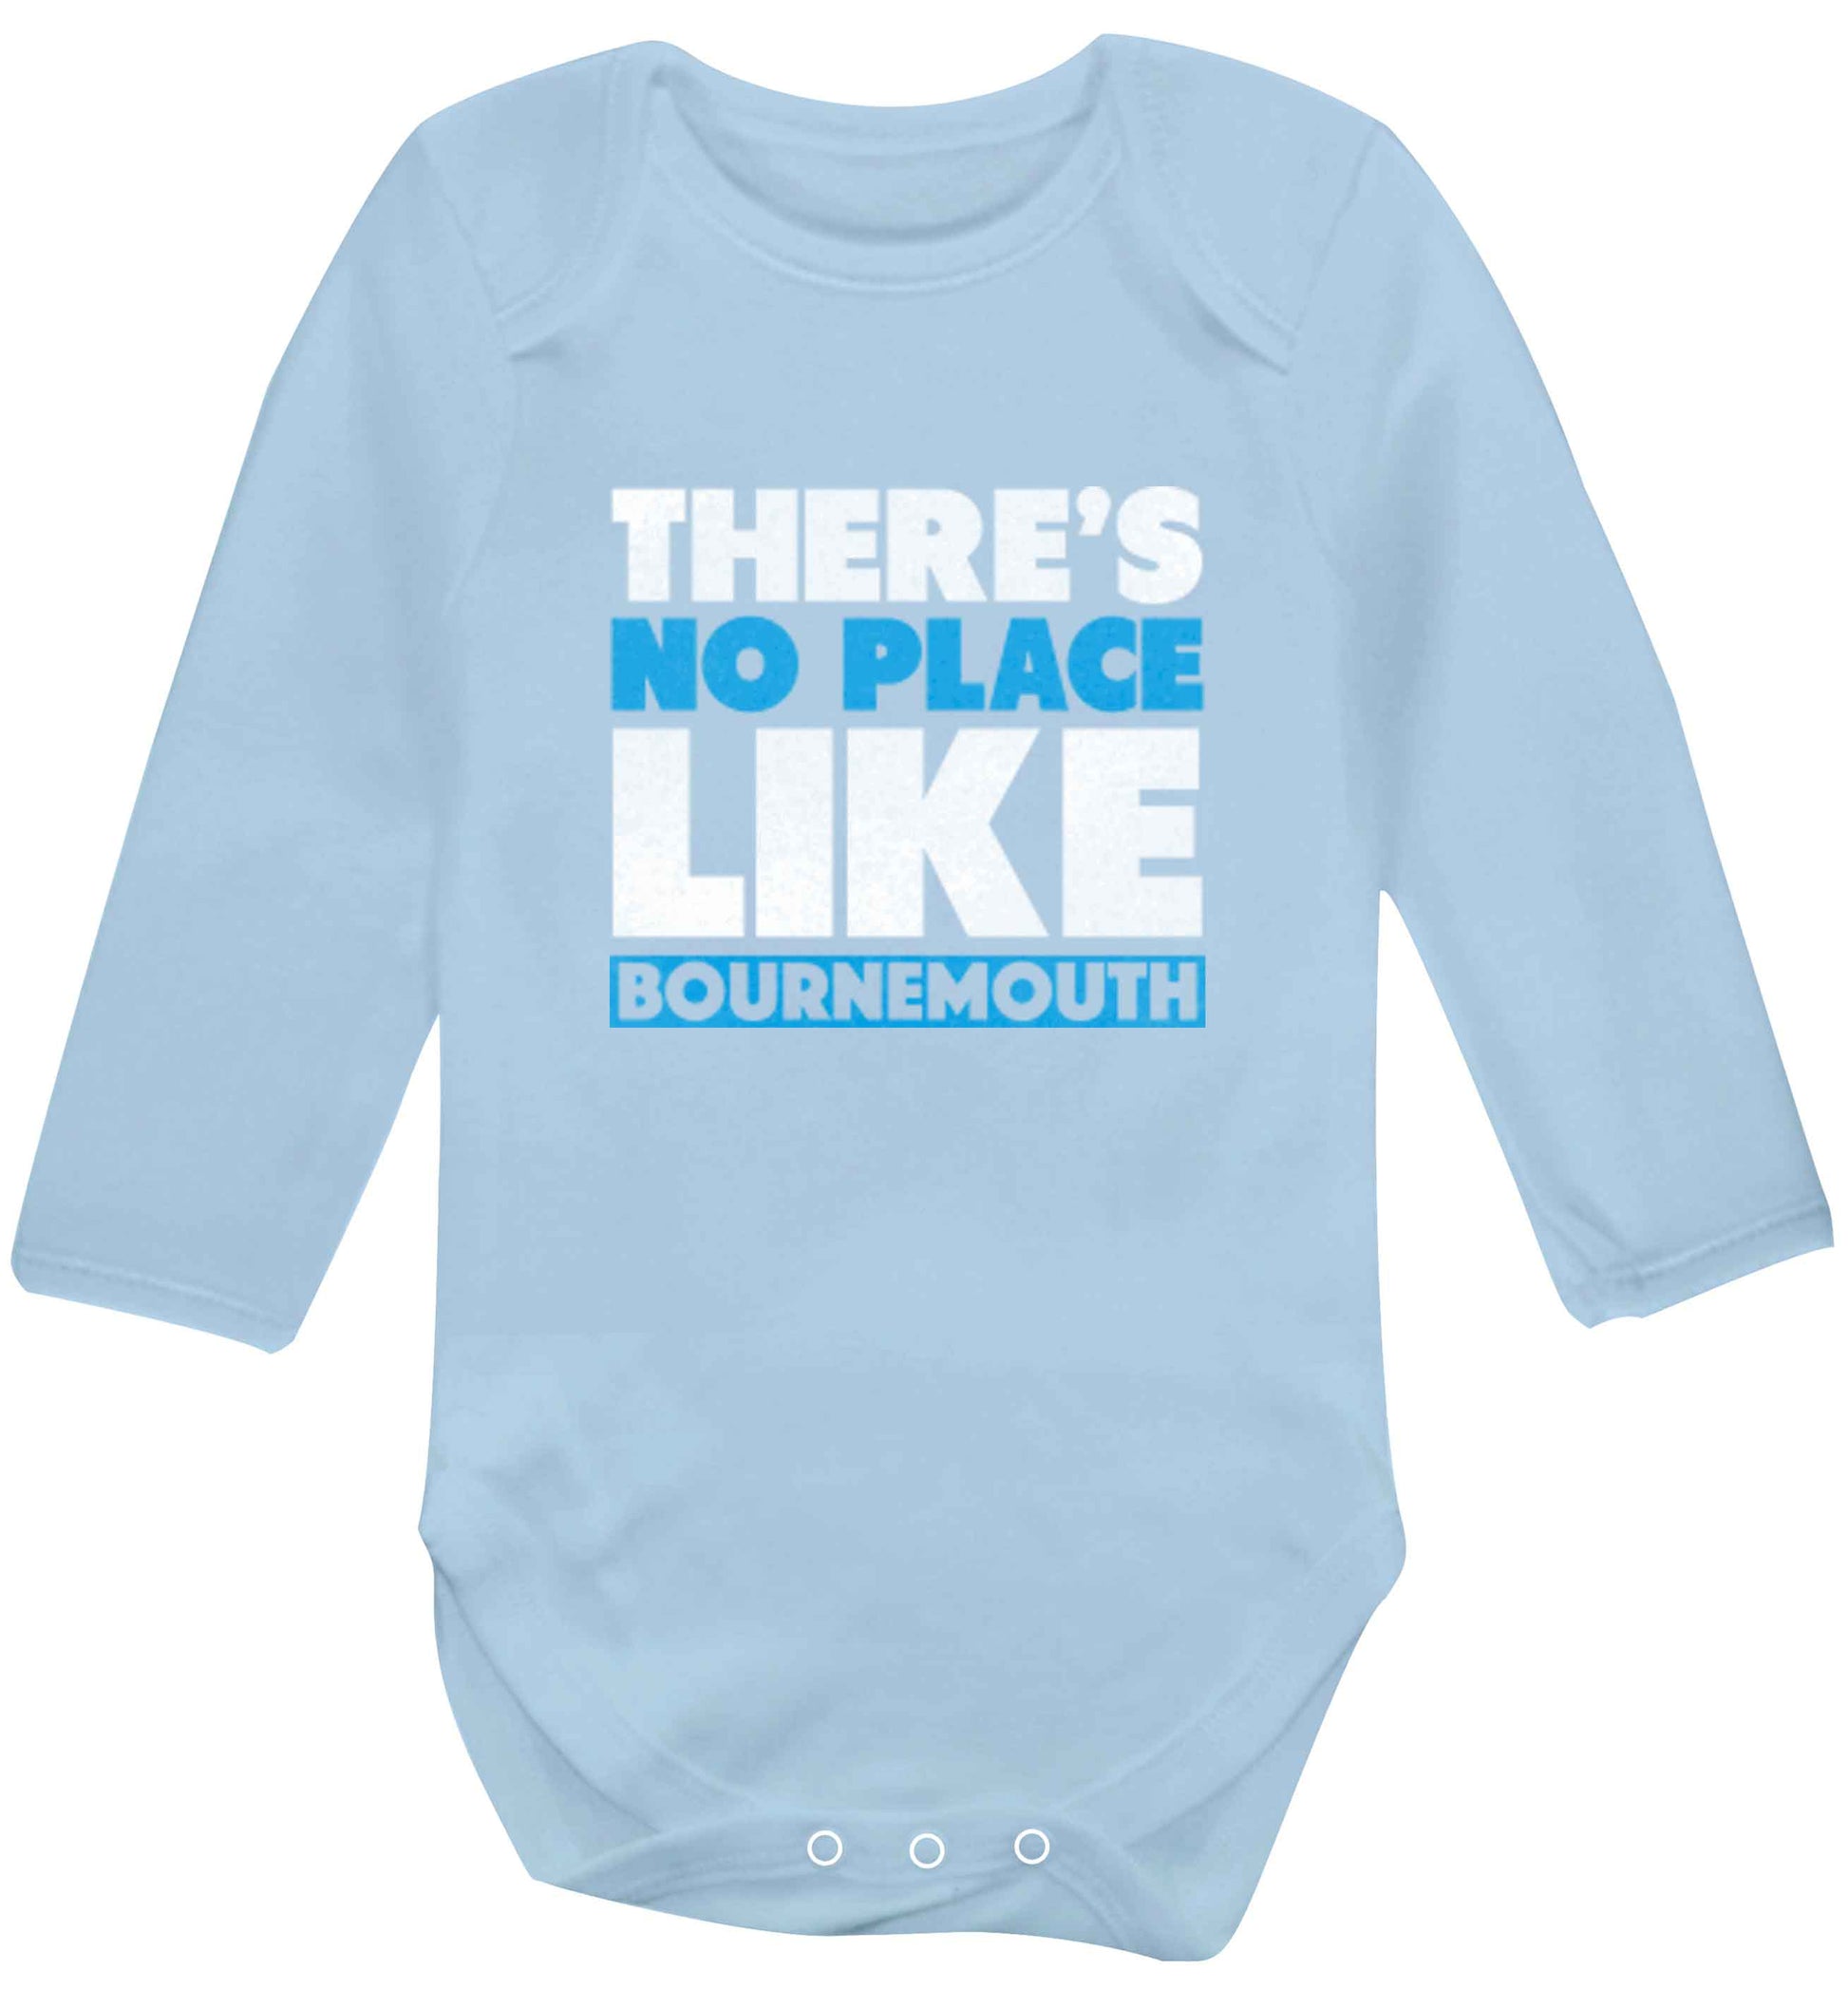 There's no place like Bournemouth baby vest long sleeved pale blue 6-12 months